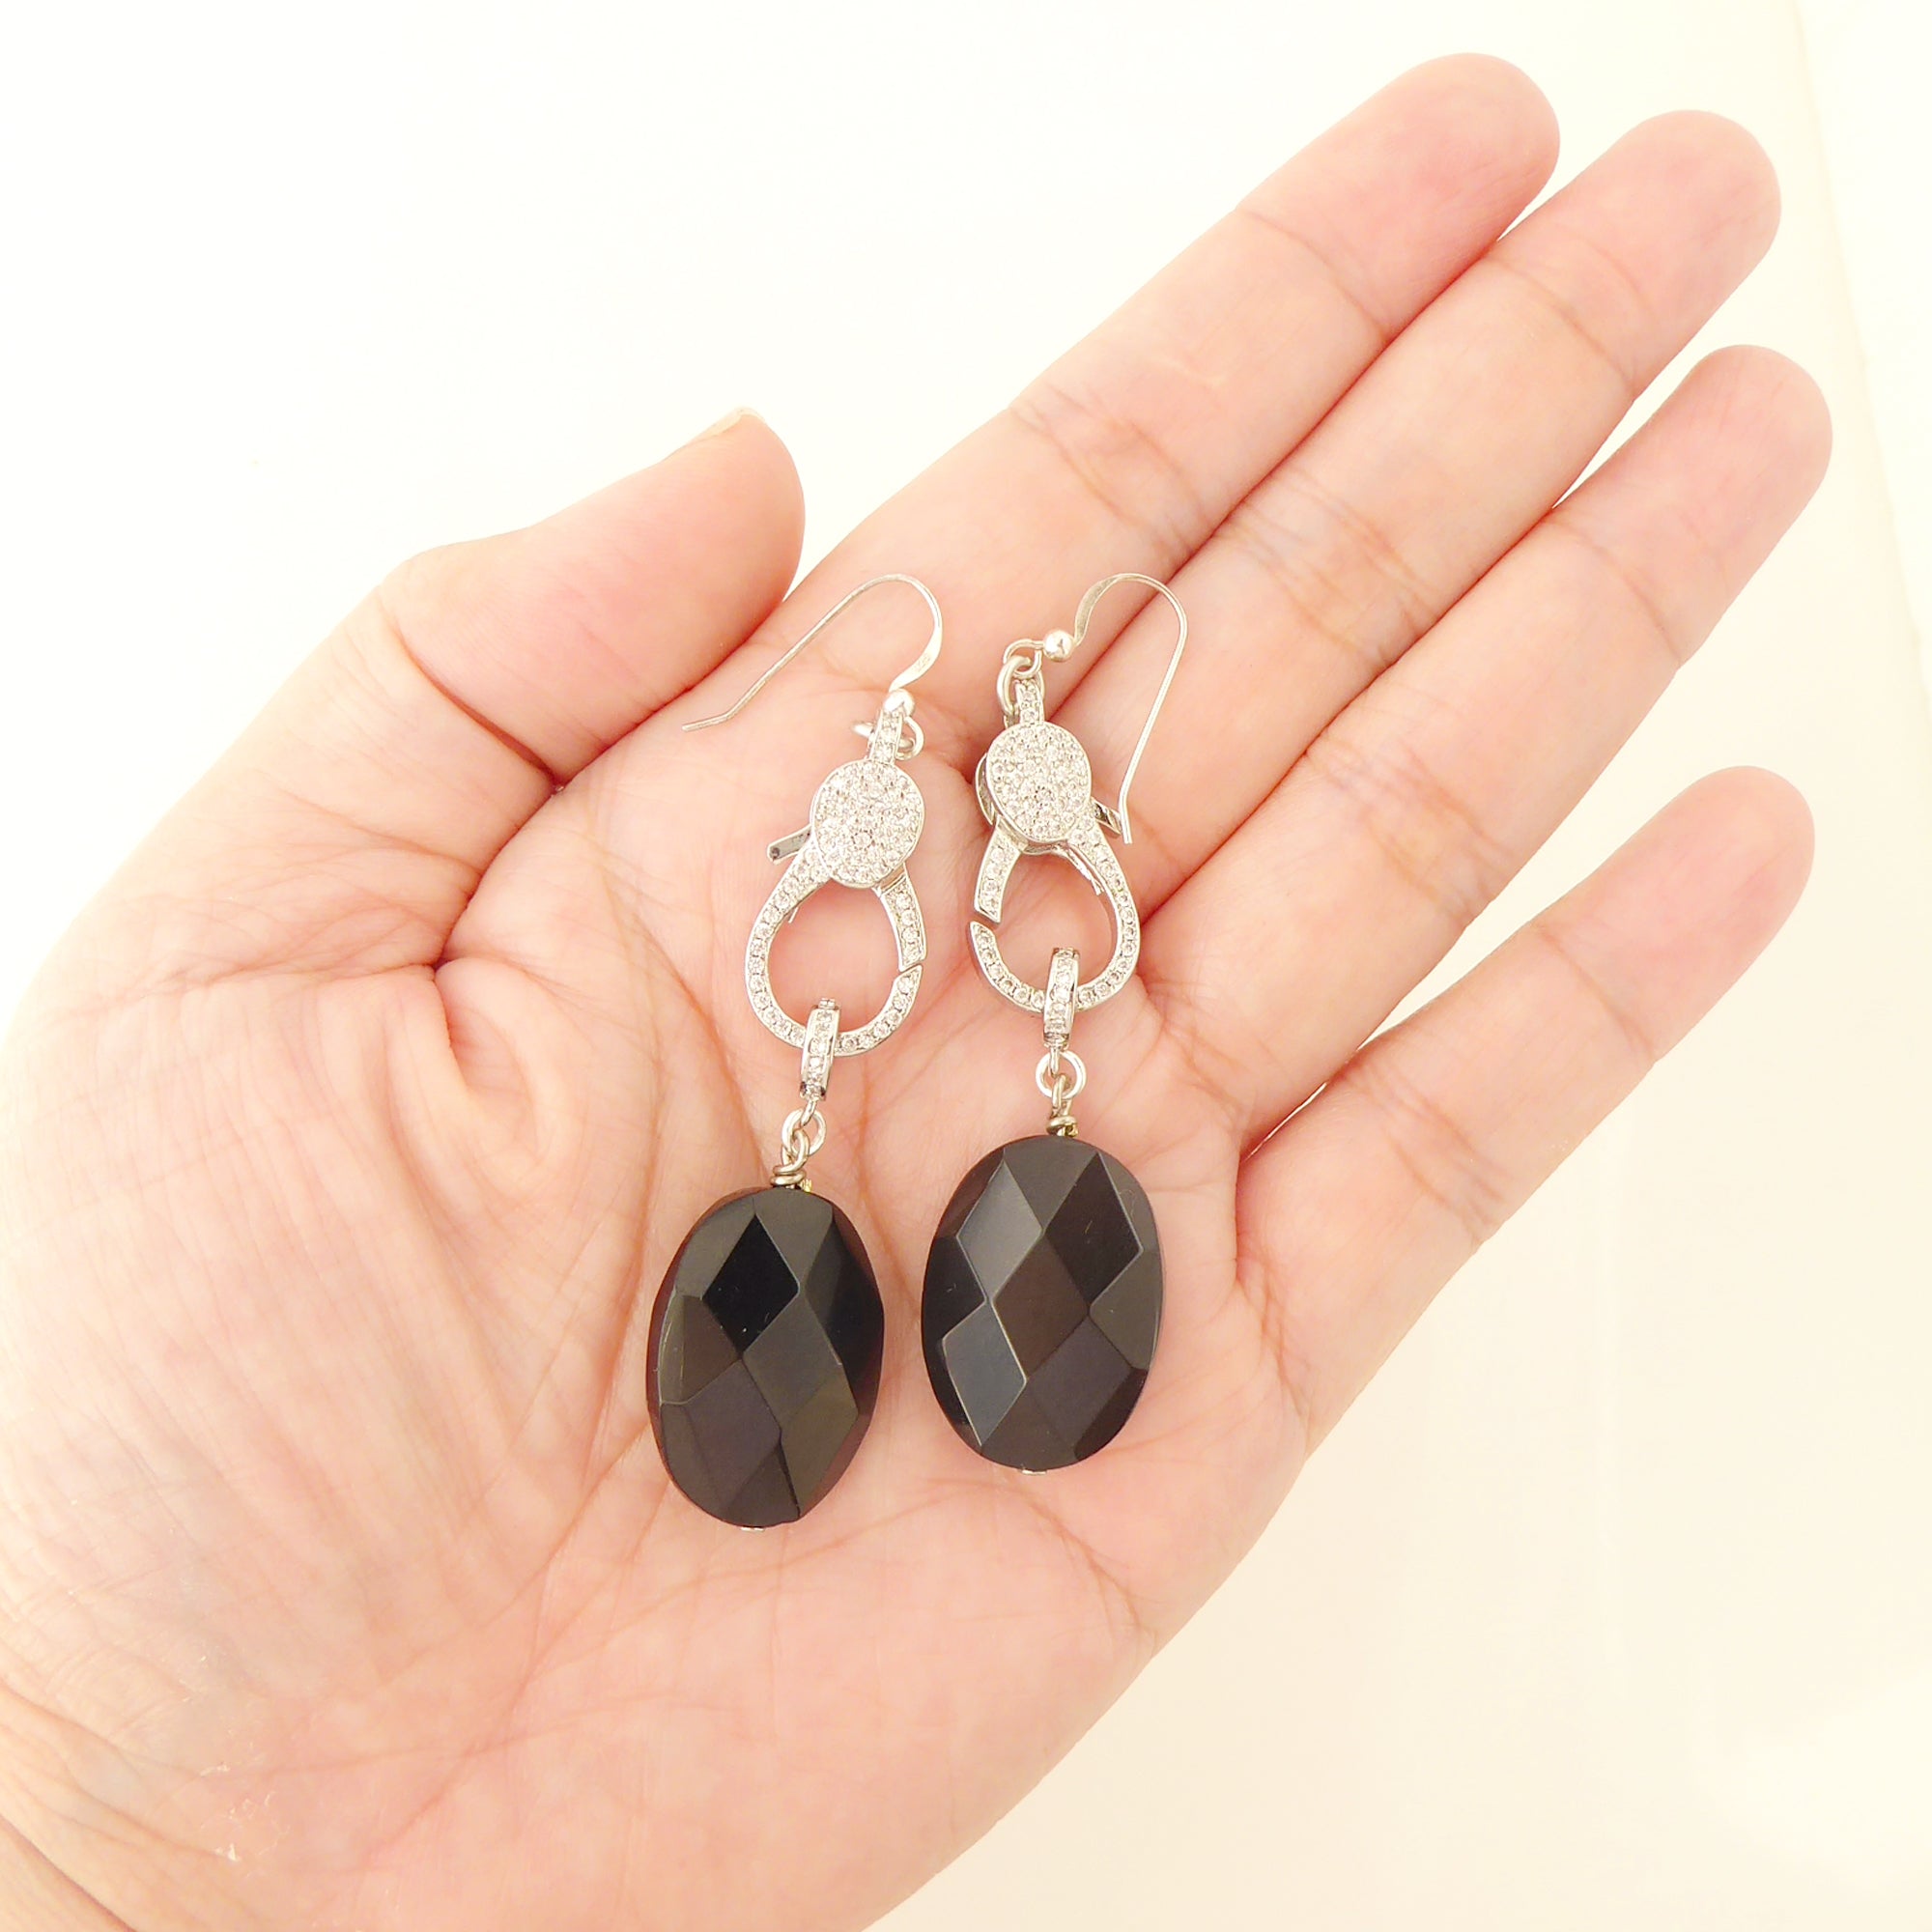 Black onyx pave clasp earrings by Jenny Dayco 4